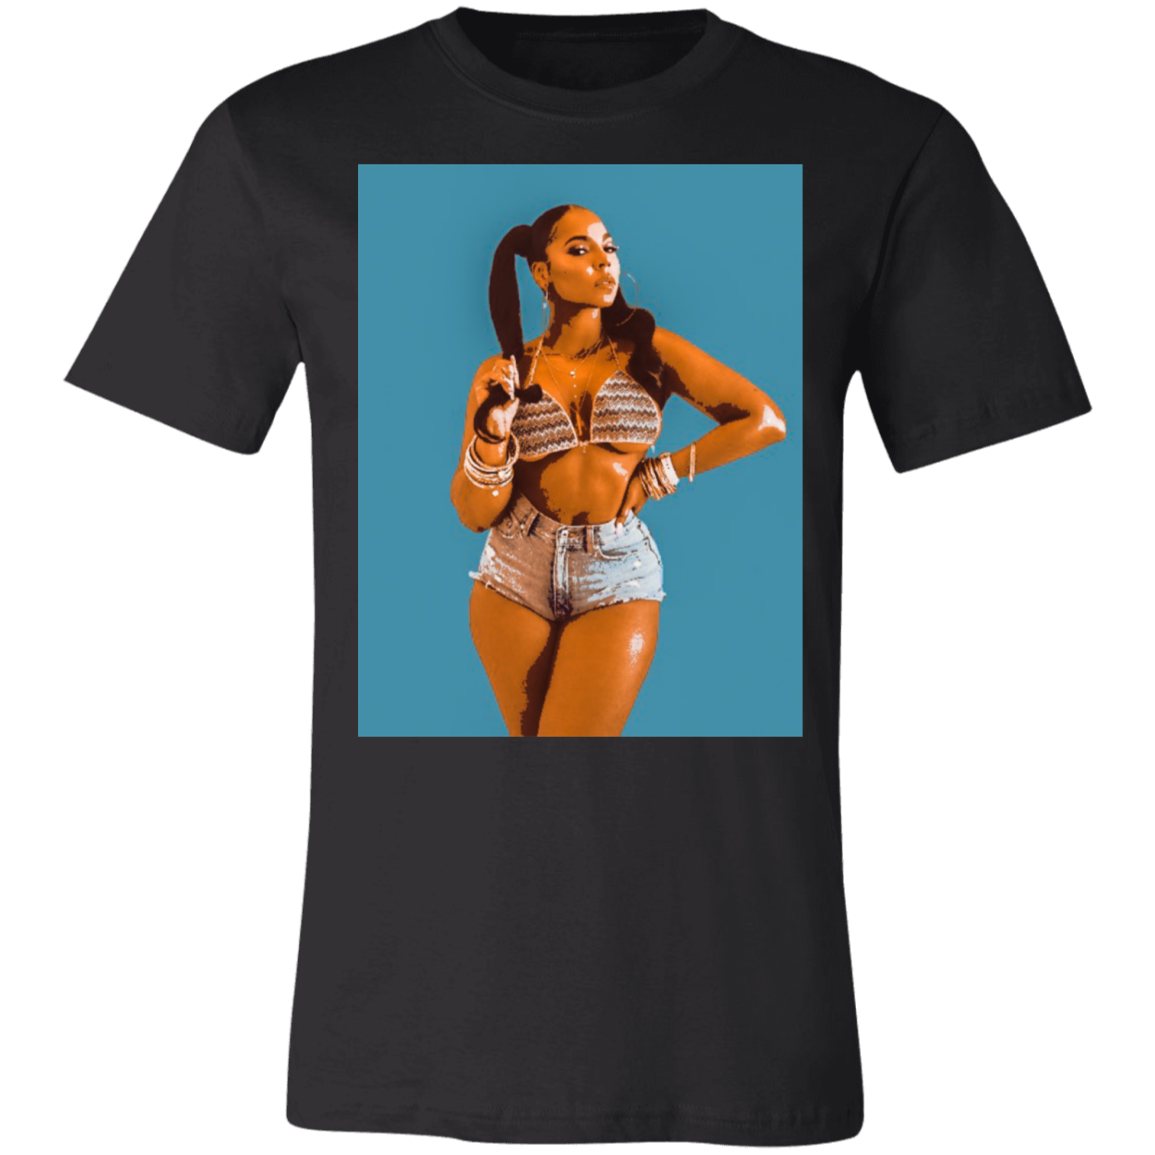 ashanti graphic tee in black, the background for the design is a lighter baby blue color